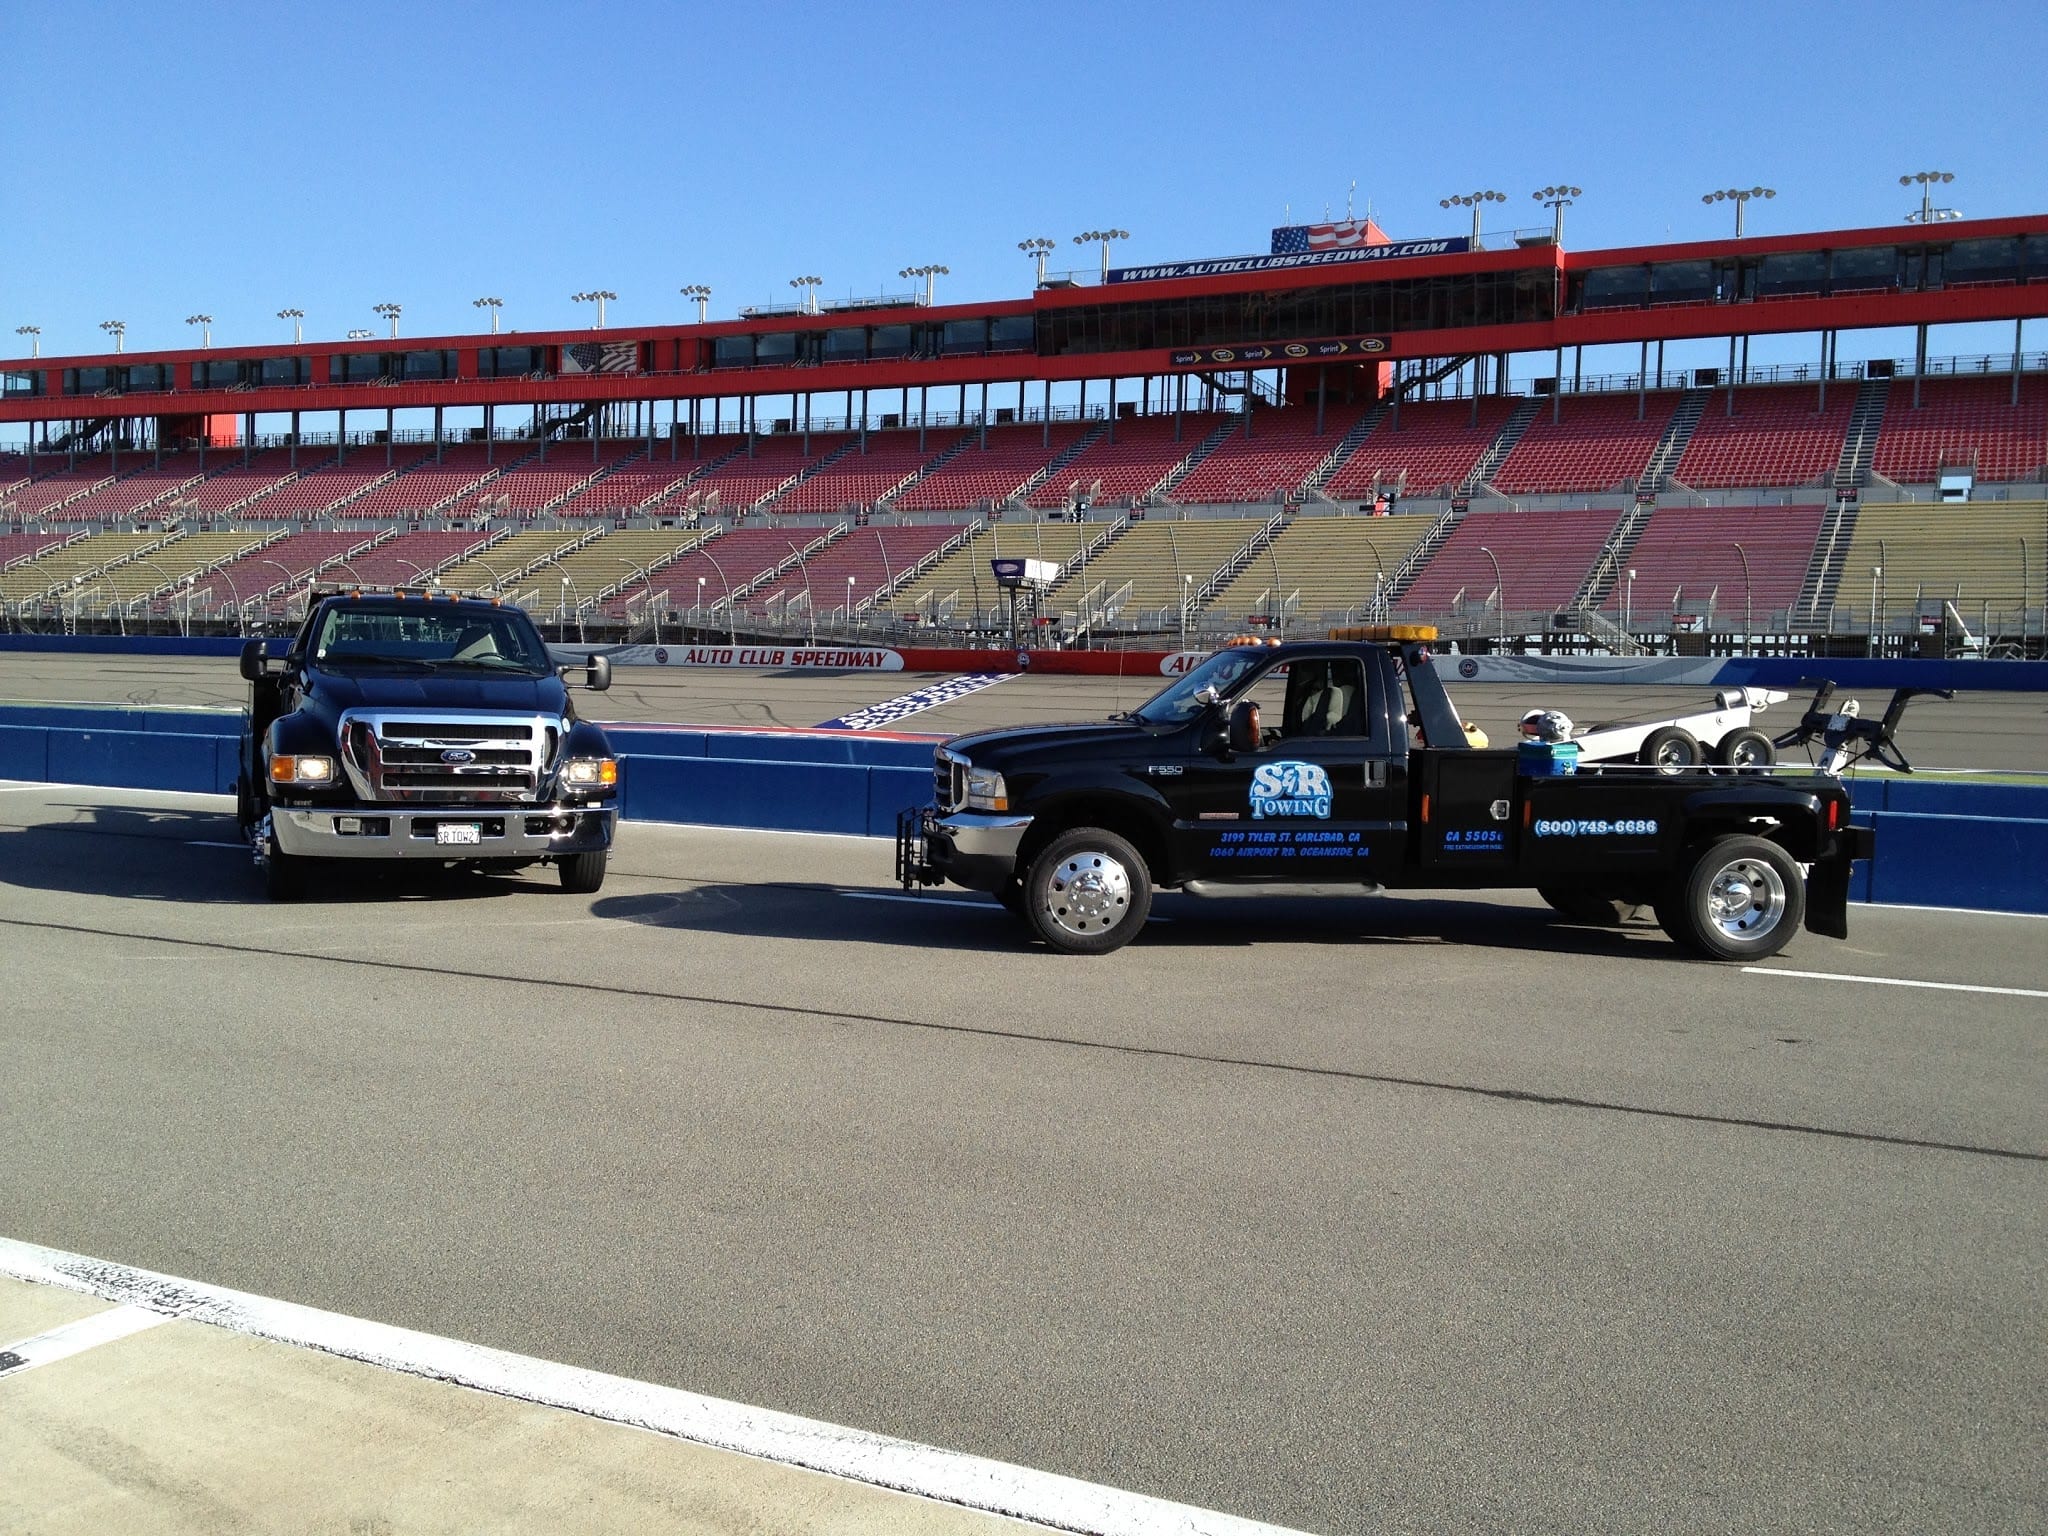 S & R Towing Inc. - Vista (CA 92083), US, 24 hour towing service